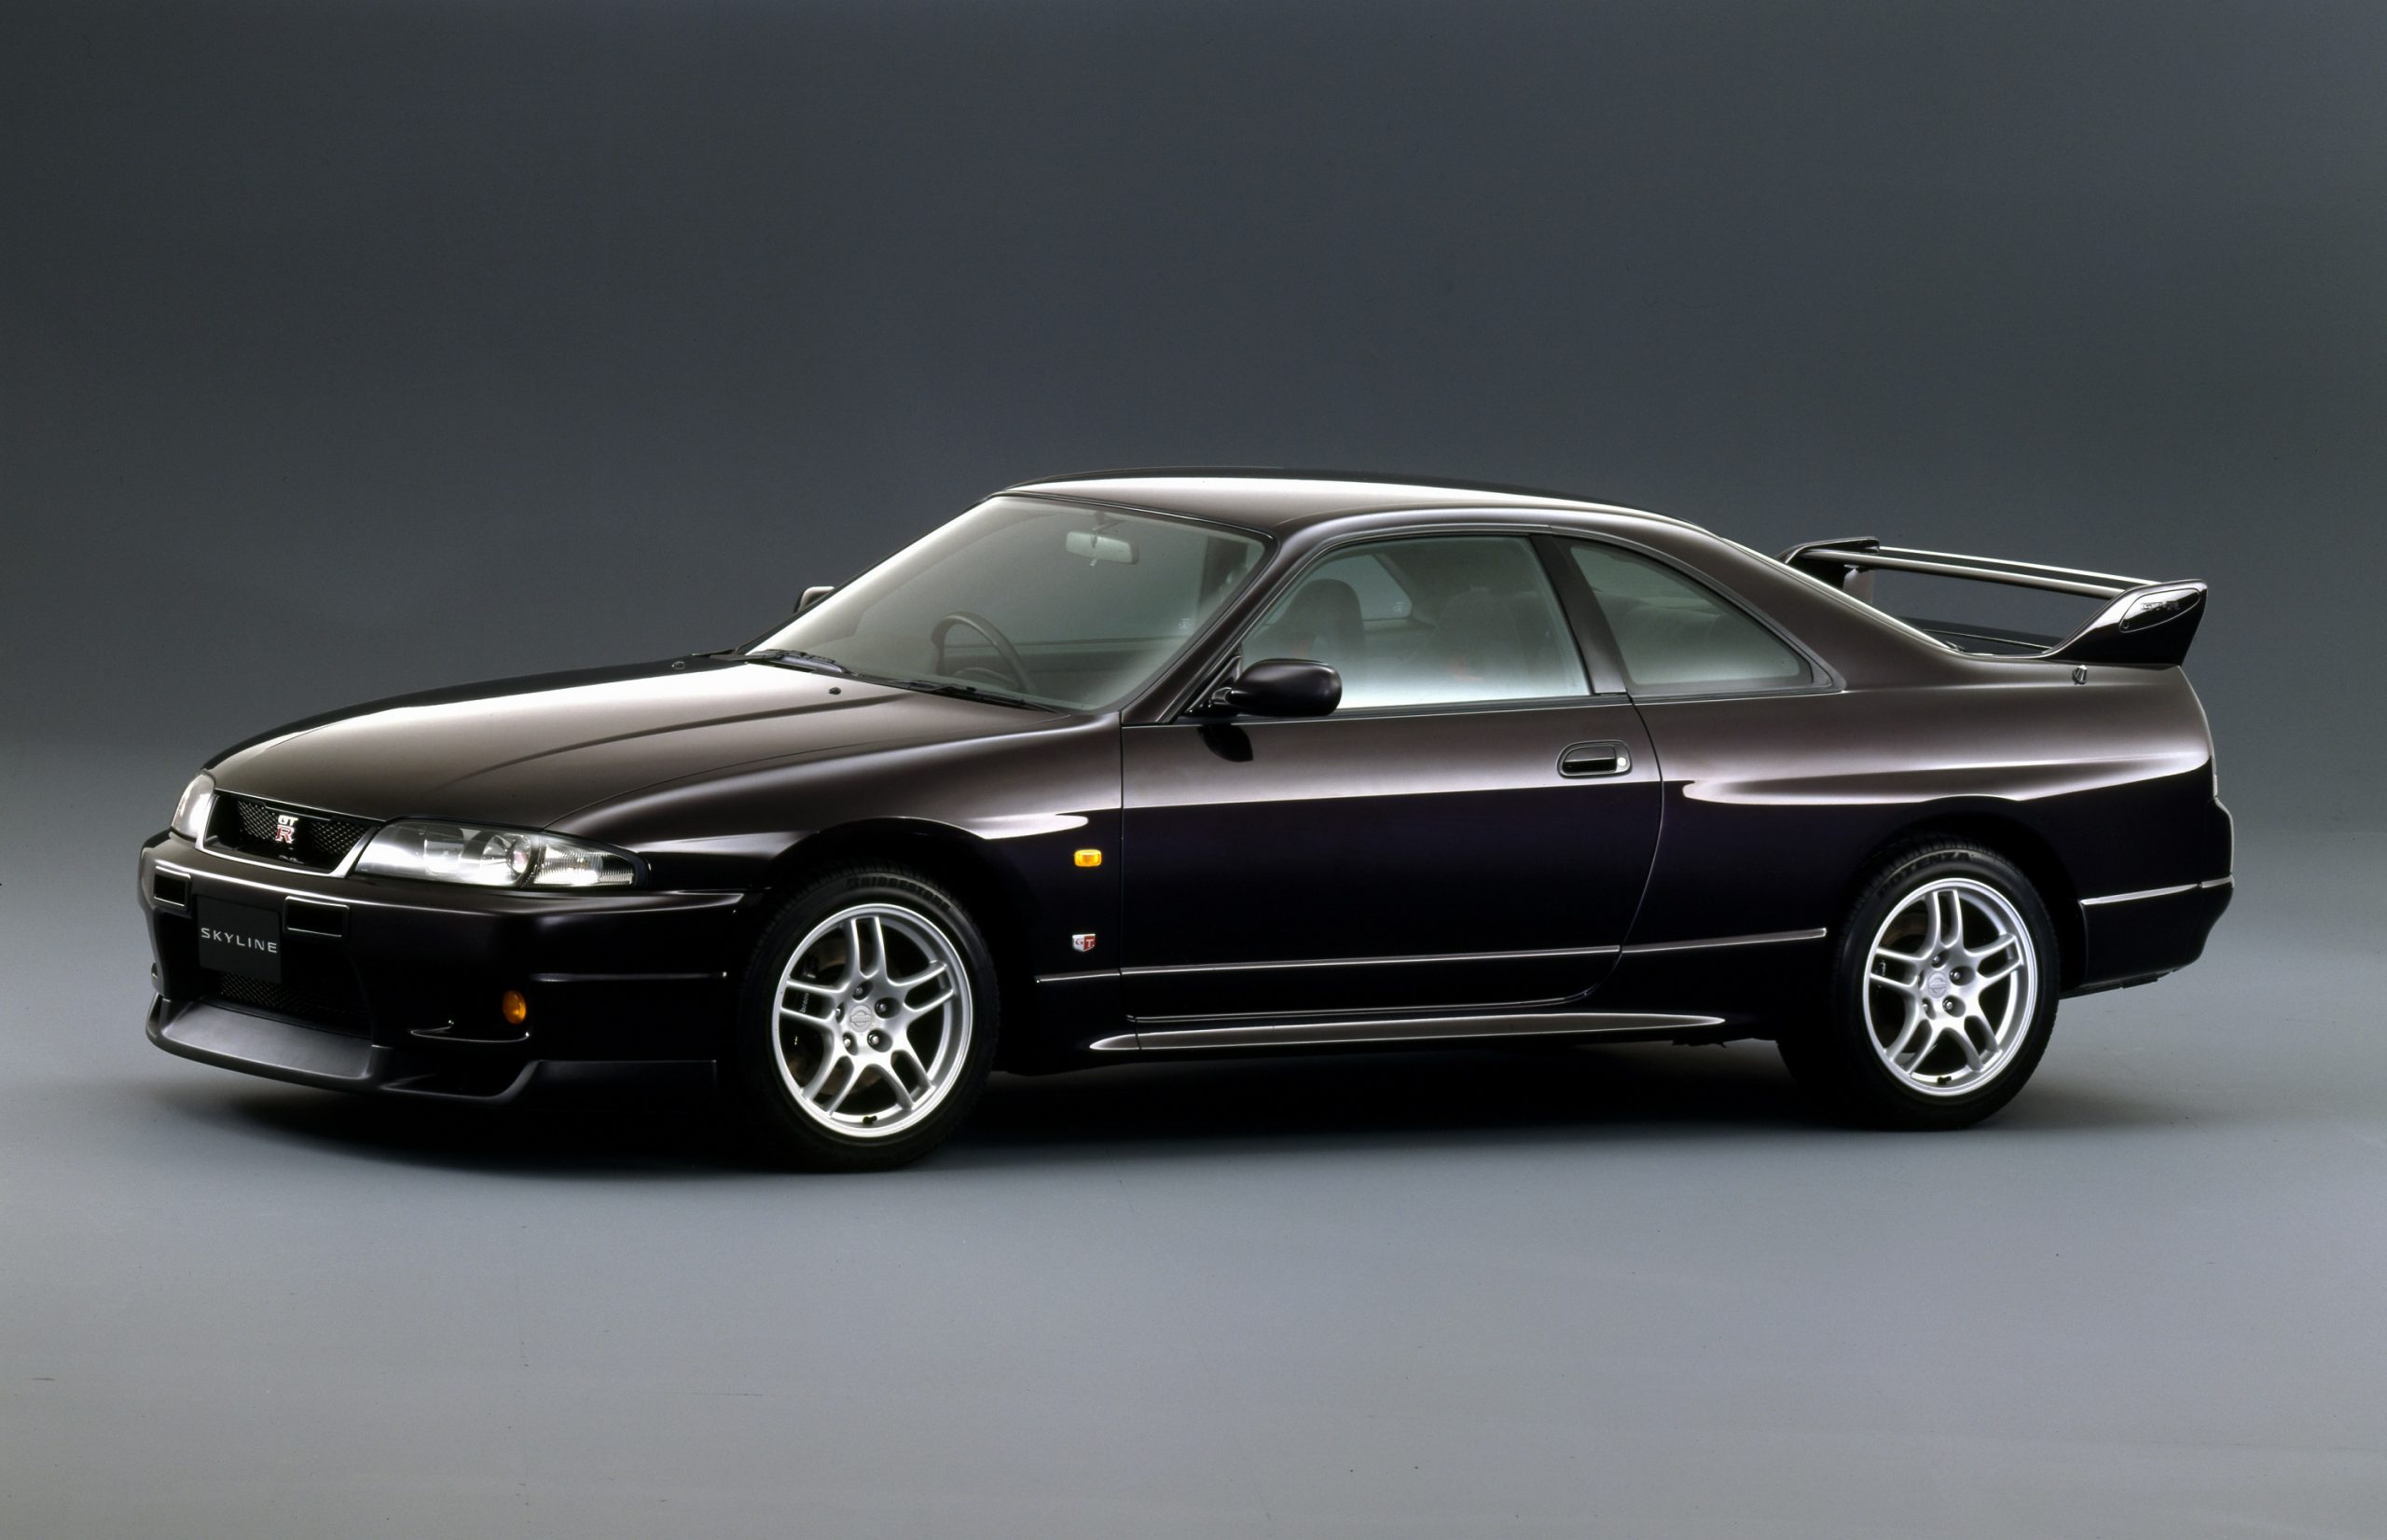 A black 1995 Nissan GT-R R33 shot from the front 3/4 in a photo studio